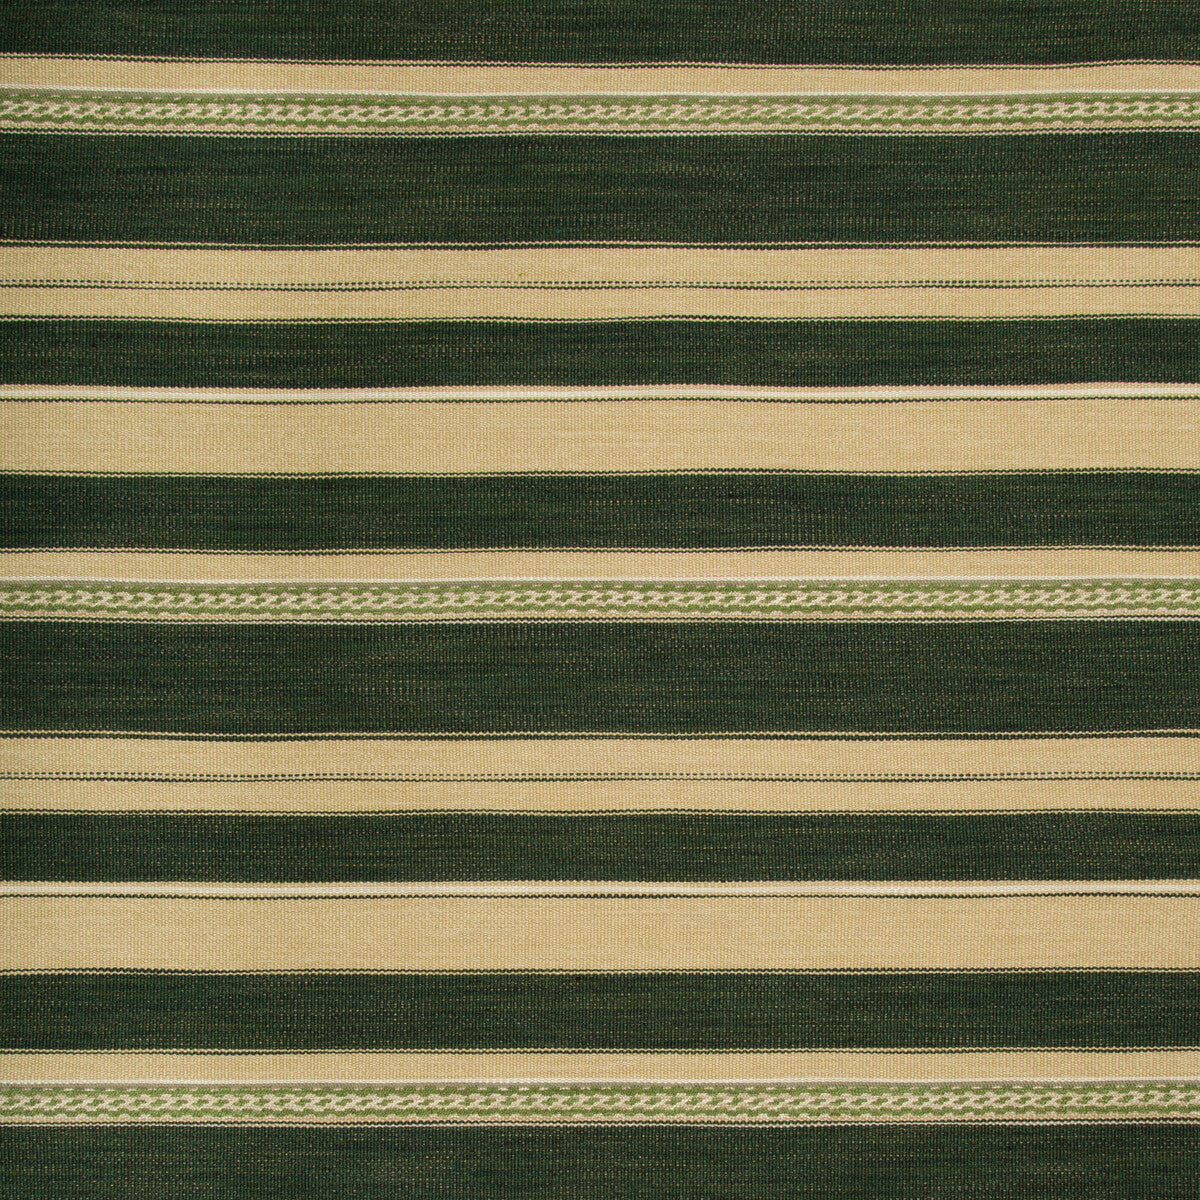 Entoto Stripe fabric in juniper/leaf color - pattern 2017143.303.0 - by Lee Jofa in the Merkato collection